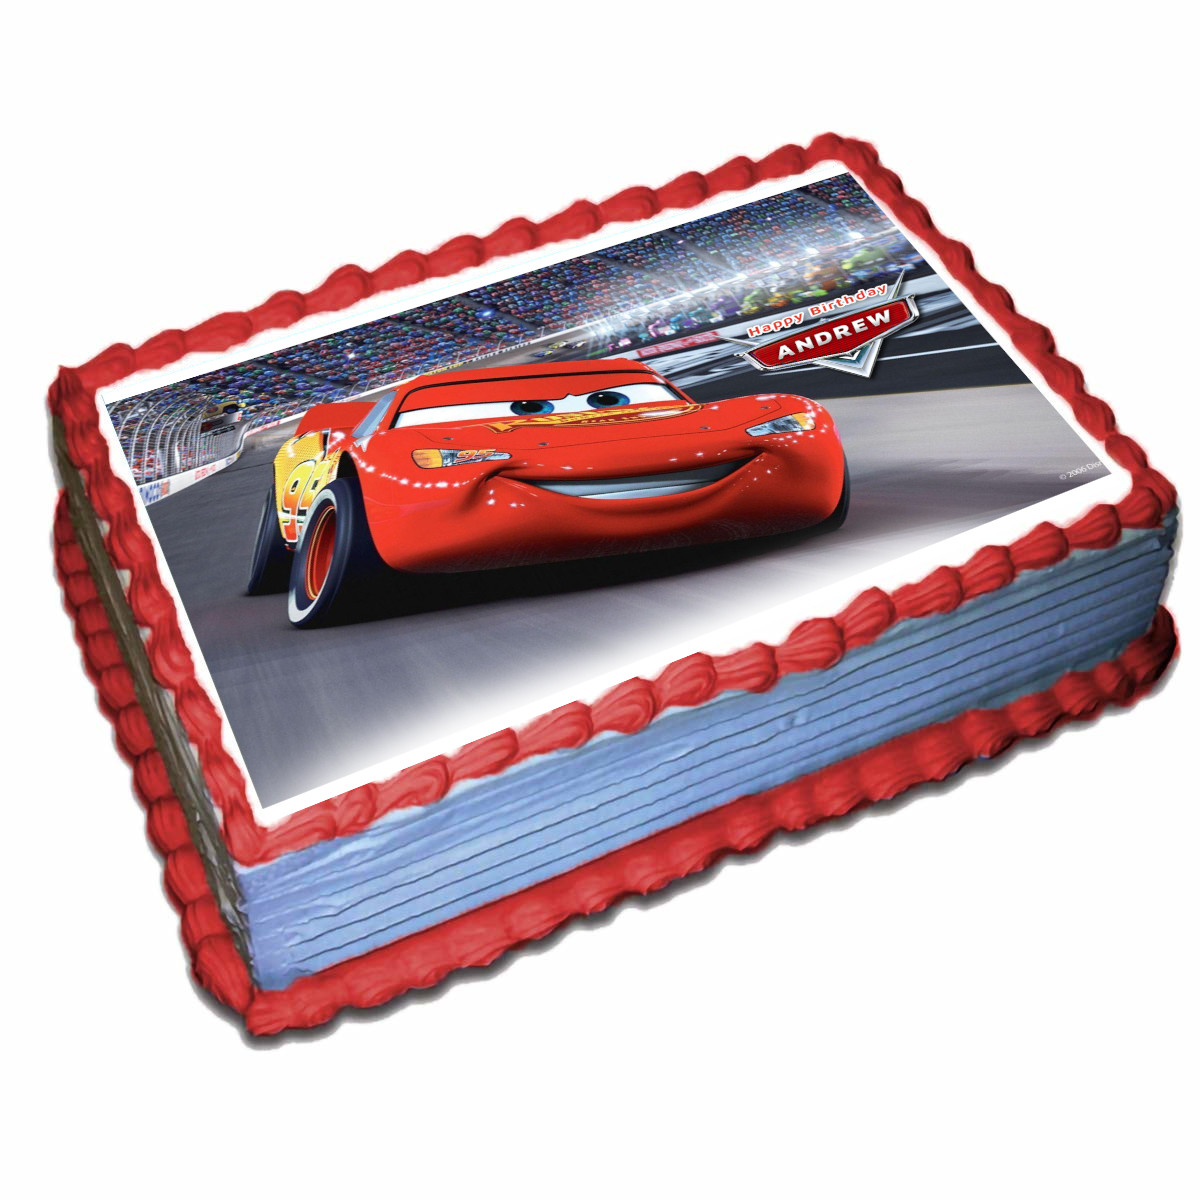 Lightning McQueen Cars edible cake image party cake topper 